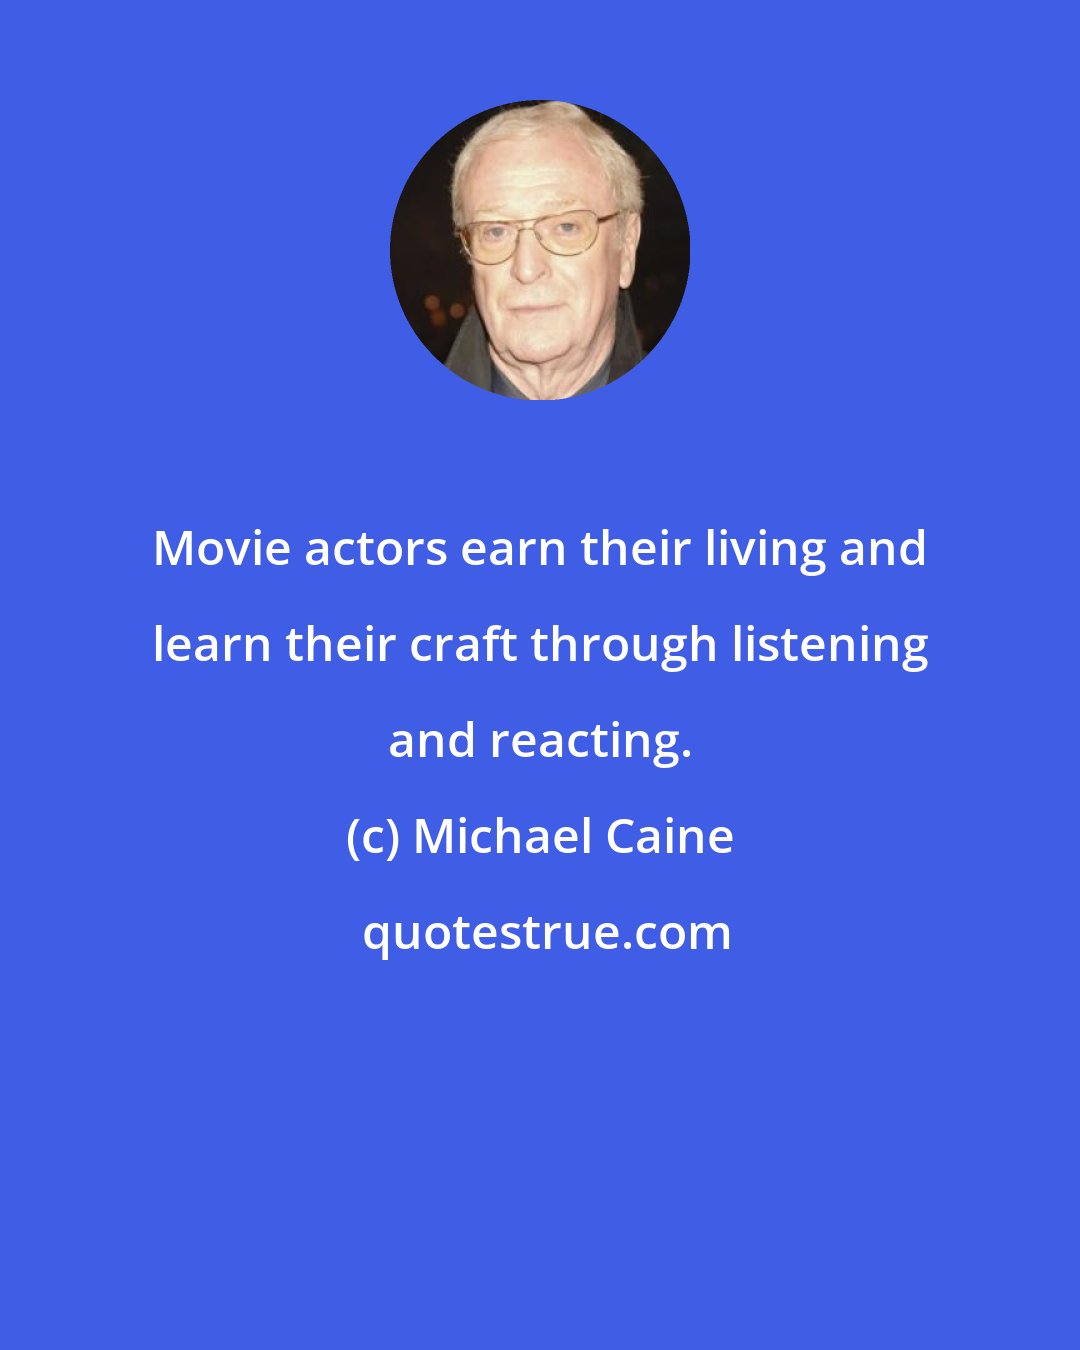 Michael Caine: Movie actors earn their living and learn their craft through listening and reacting.